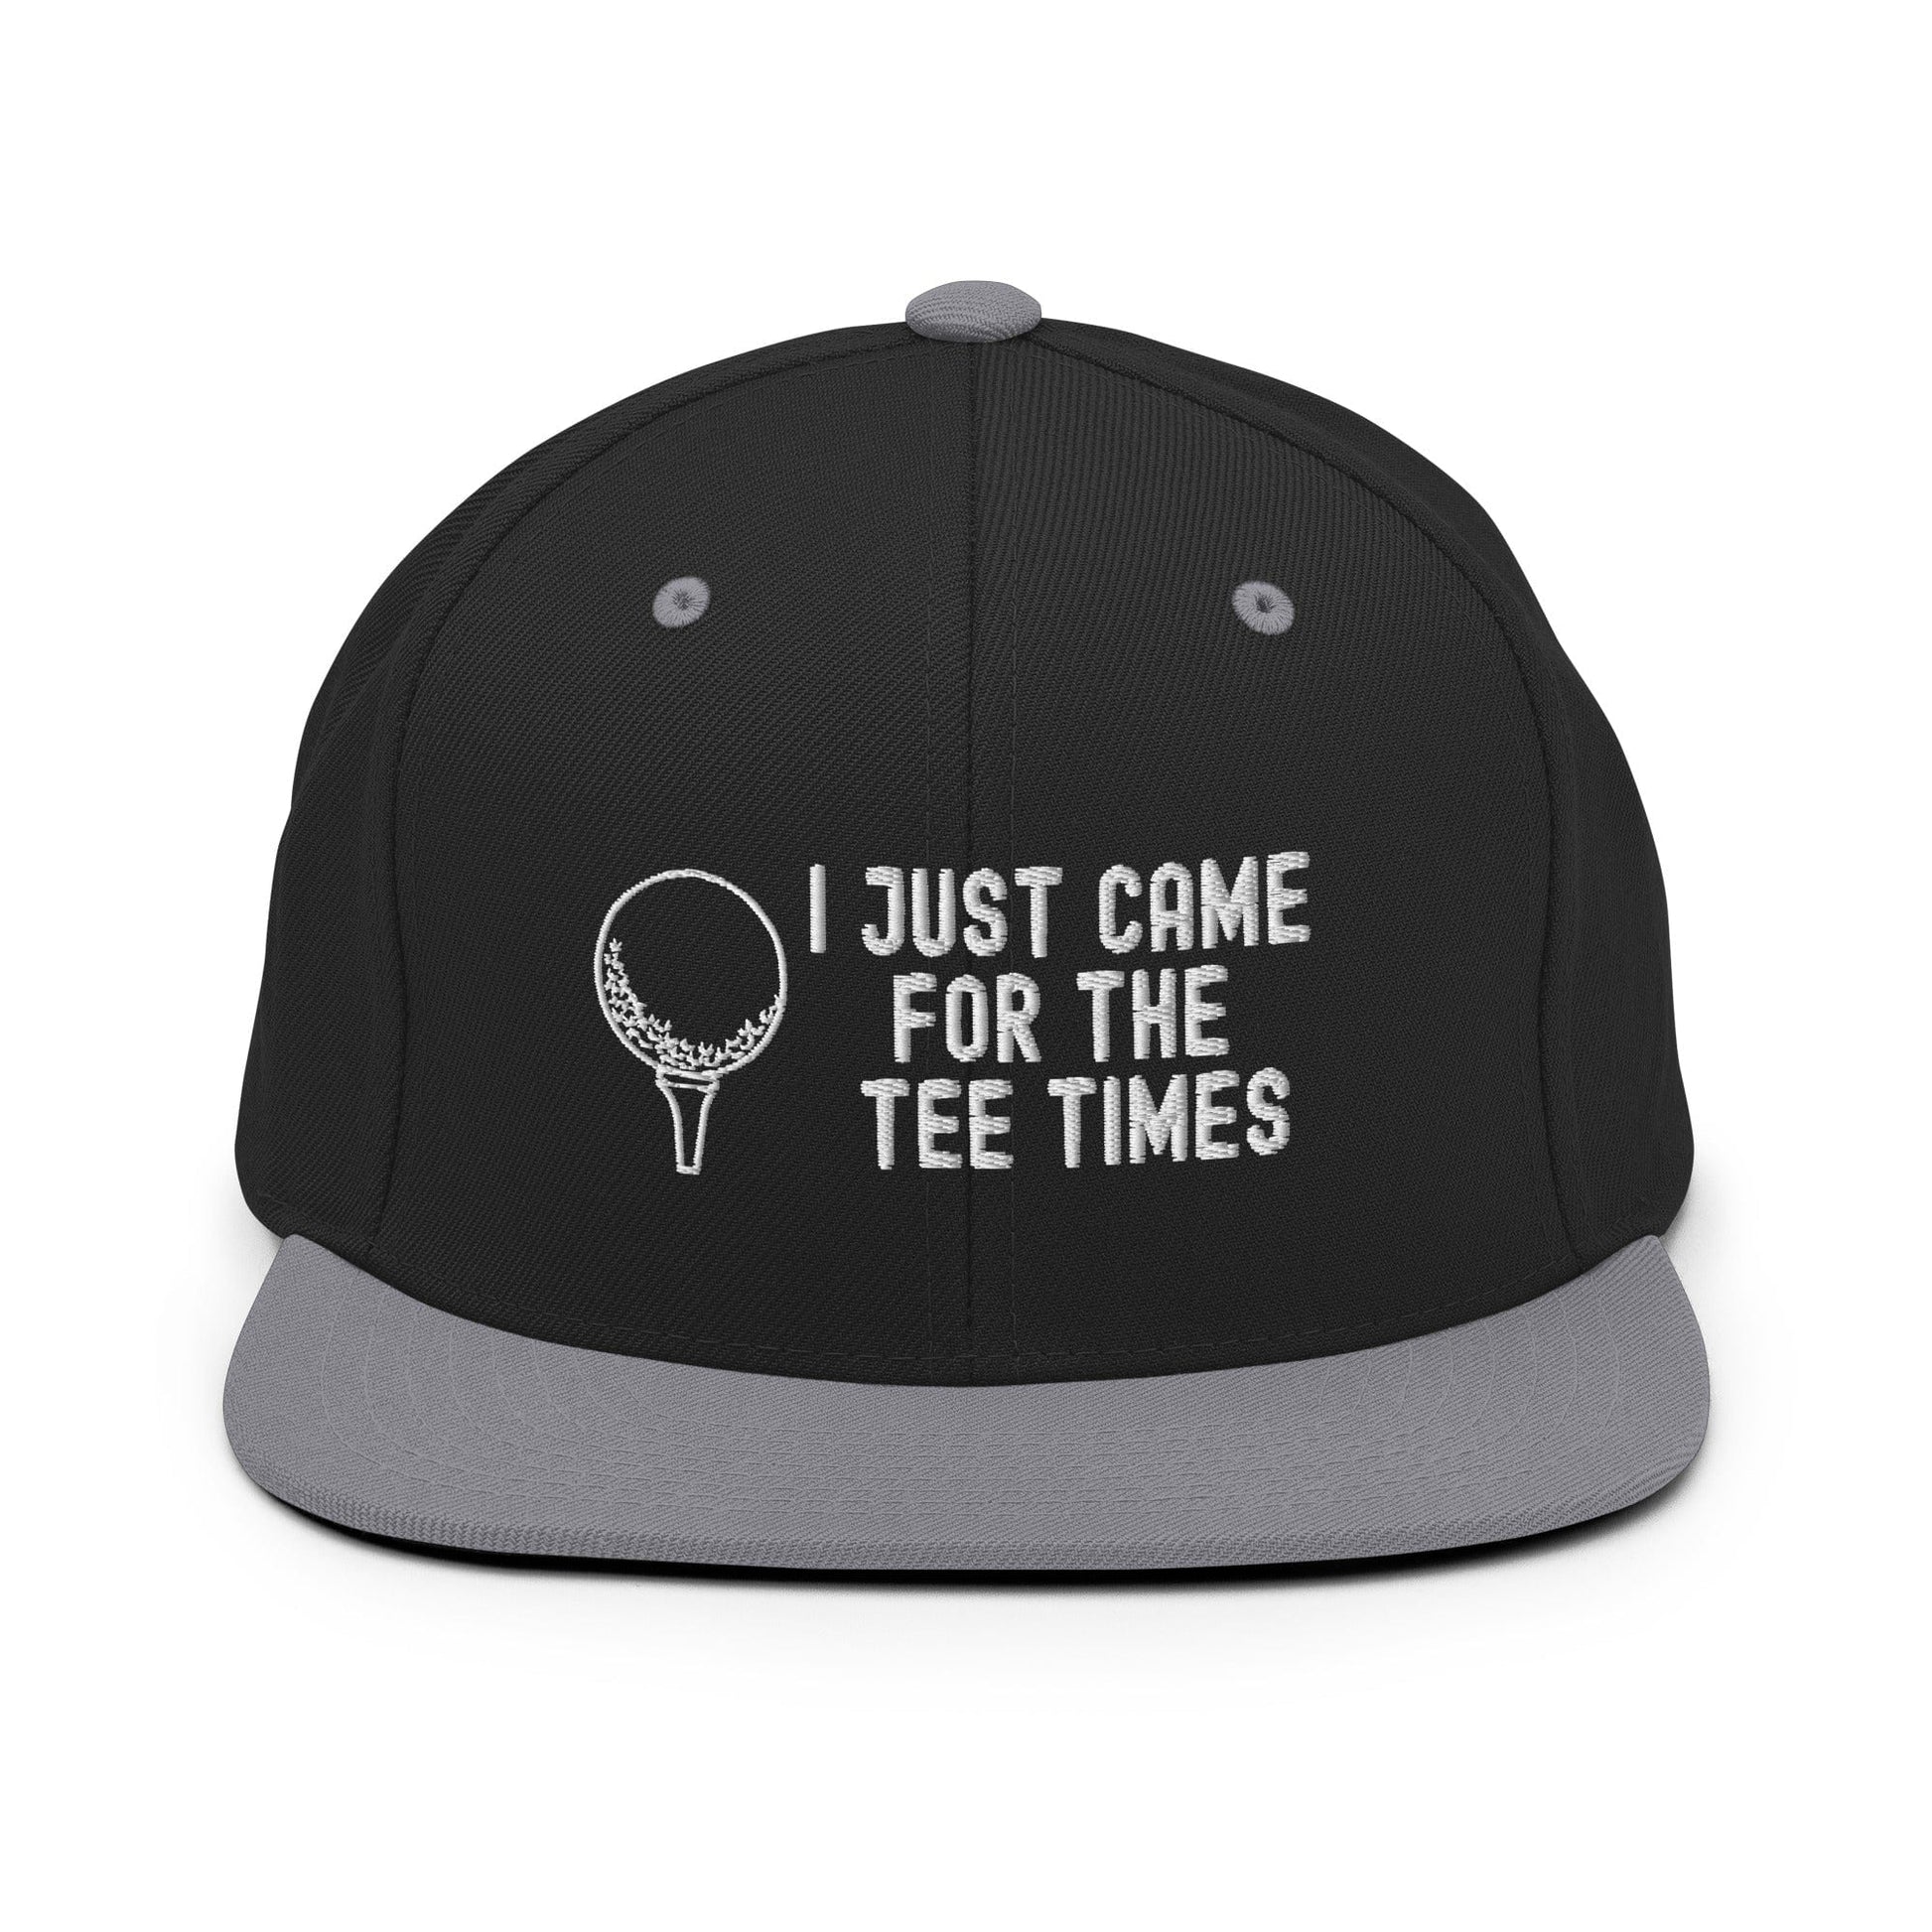 Funny Golfer Gifts  Snapback Hat Black/ Silver I Just Came For The Tee Times Snapback Hat